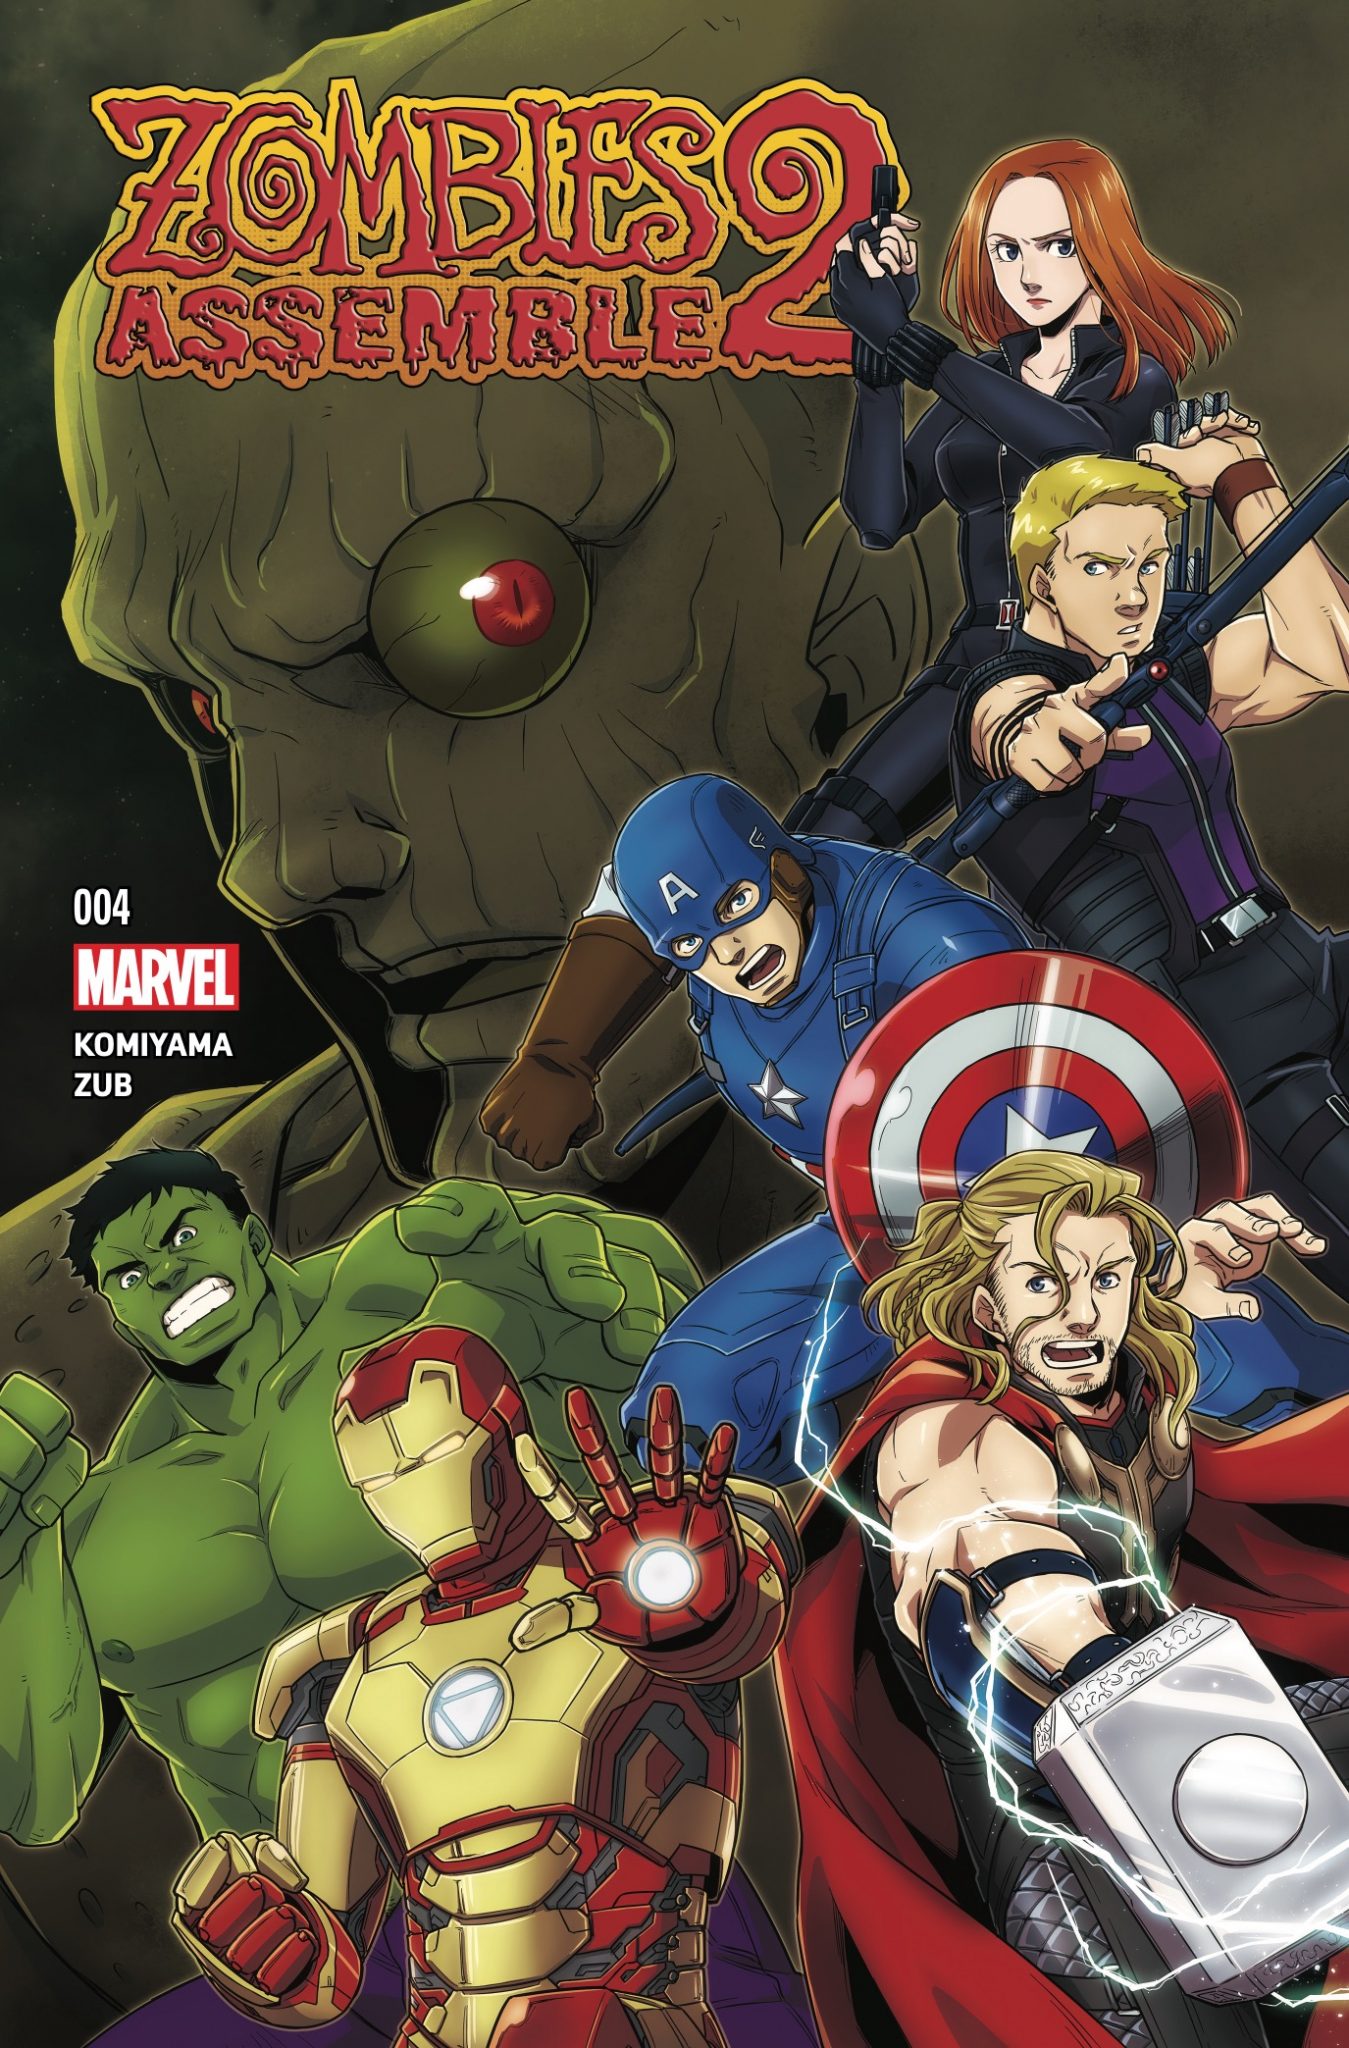 Marvel Preview: Zombies Assemble 2 #4